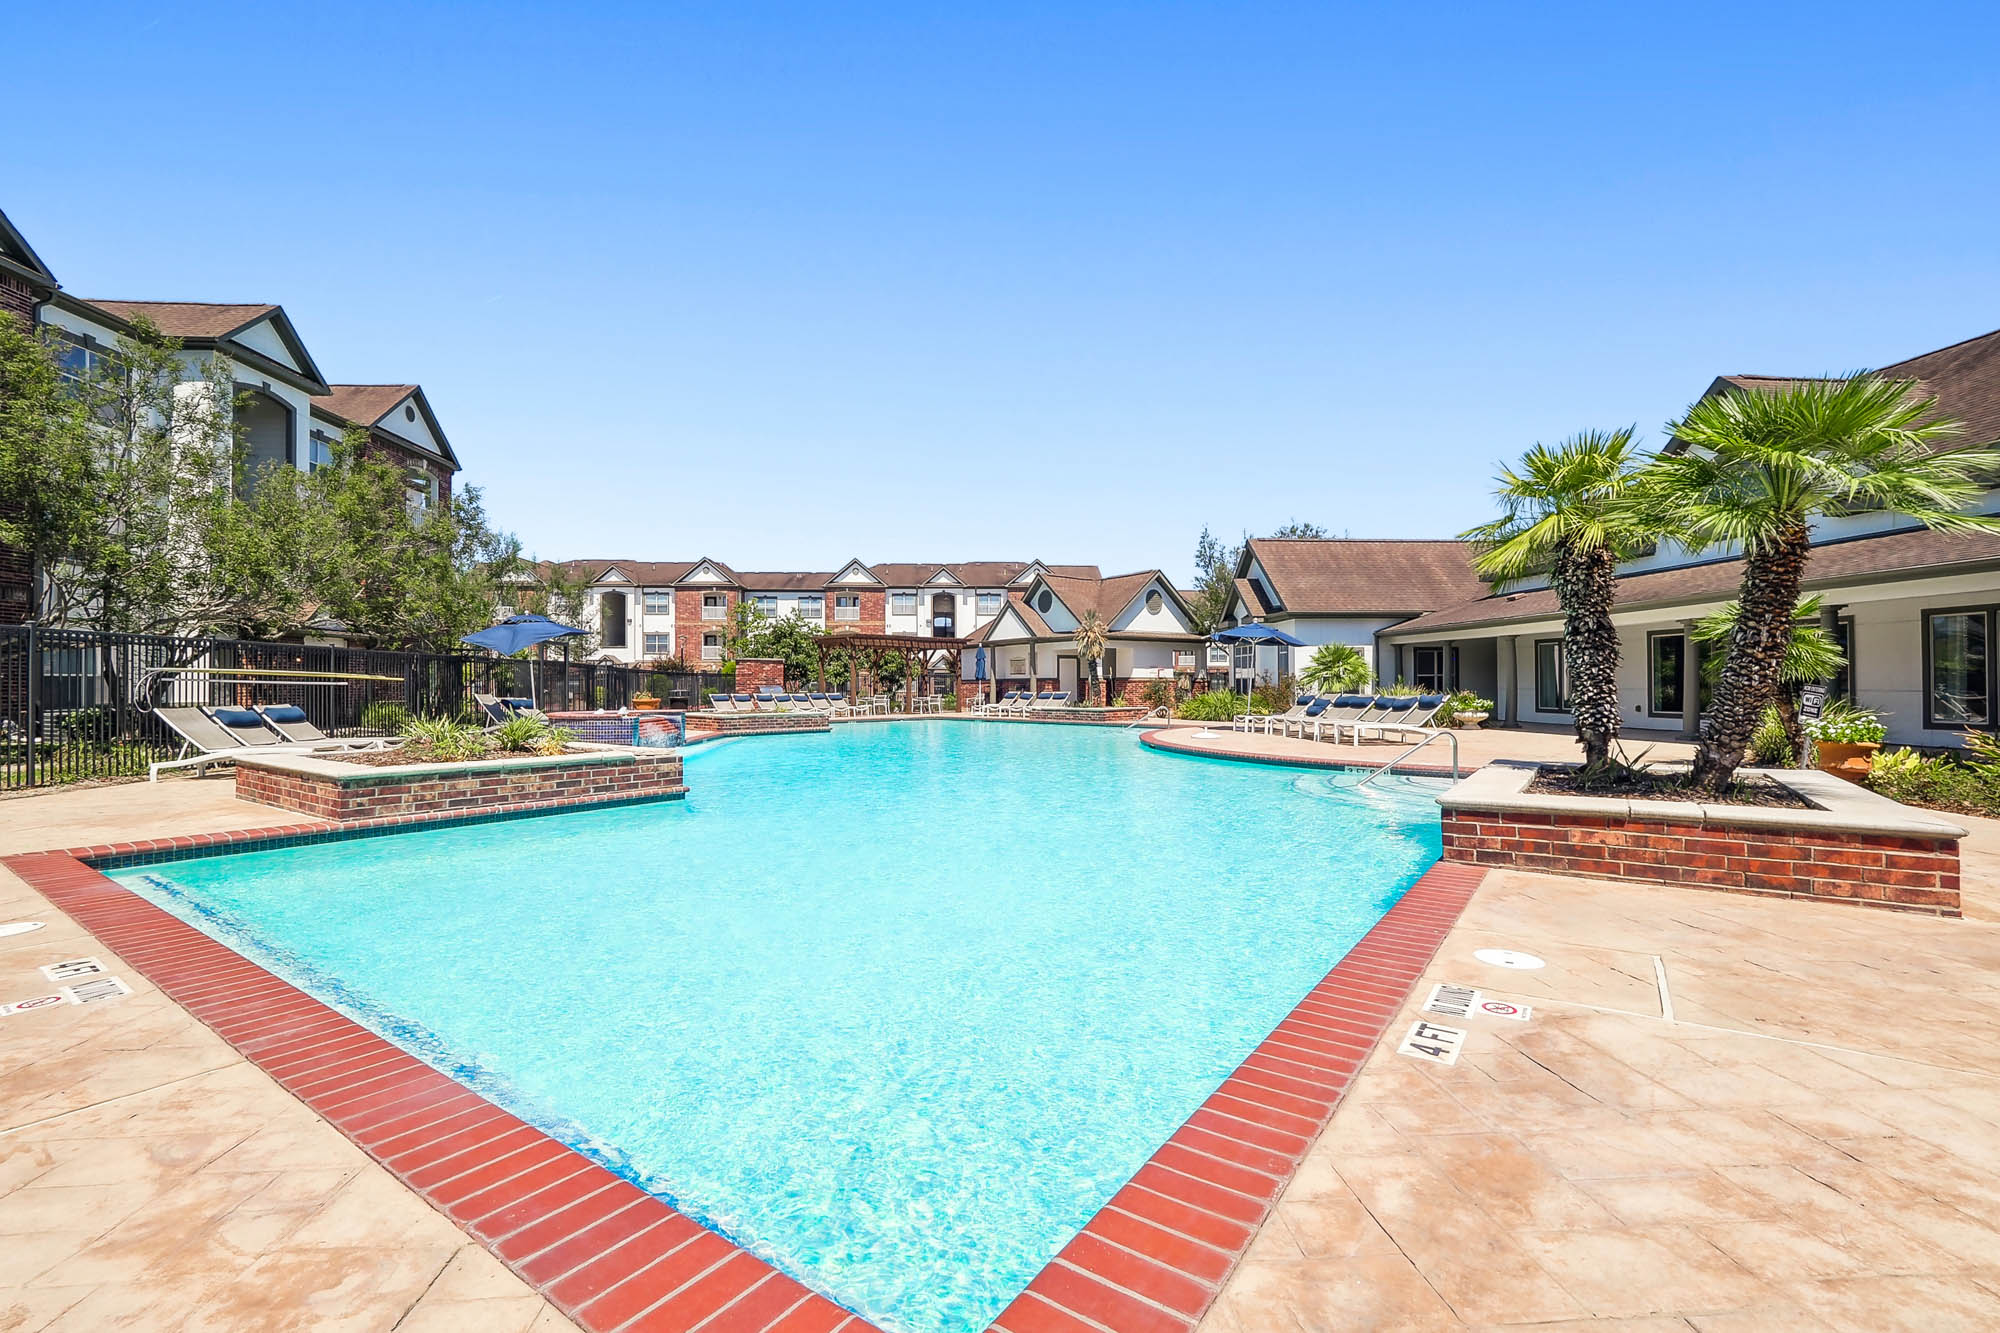 The pool at The Villas at Shadow Creek apartments in Houston, TX.